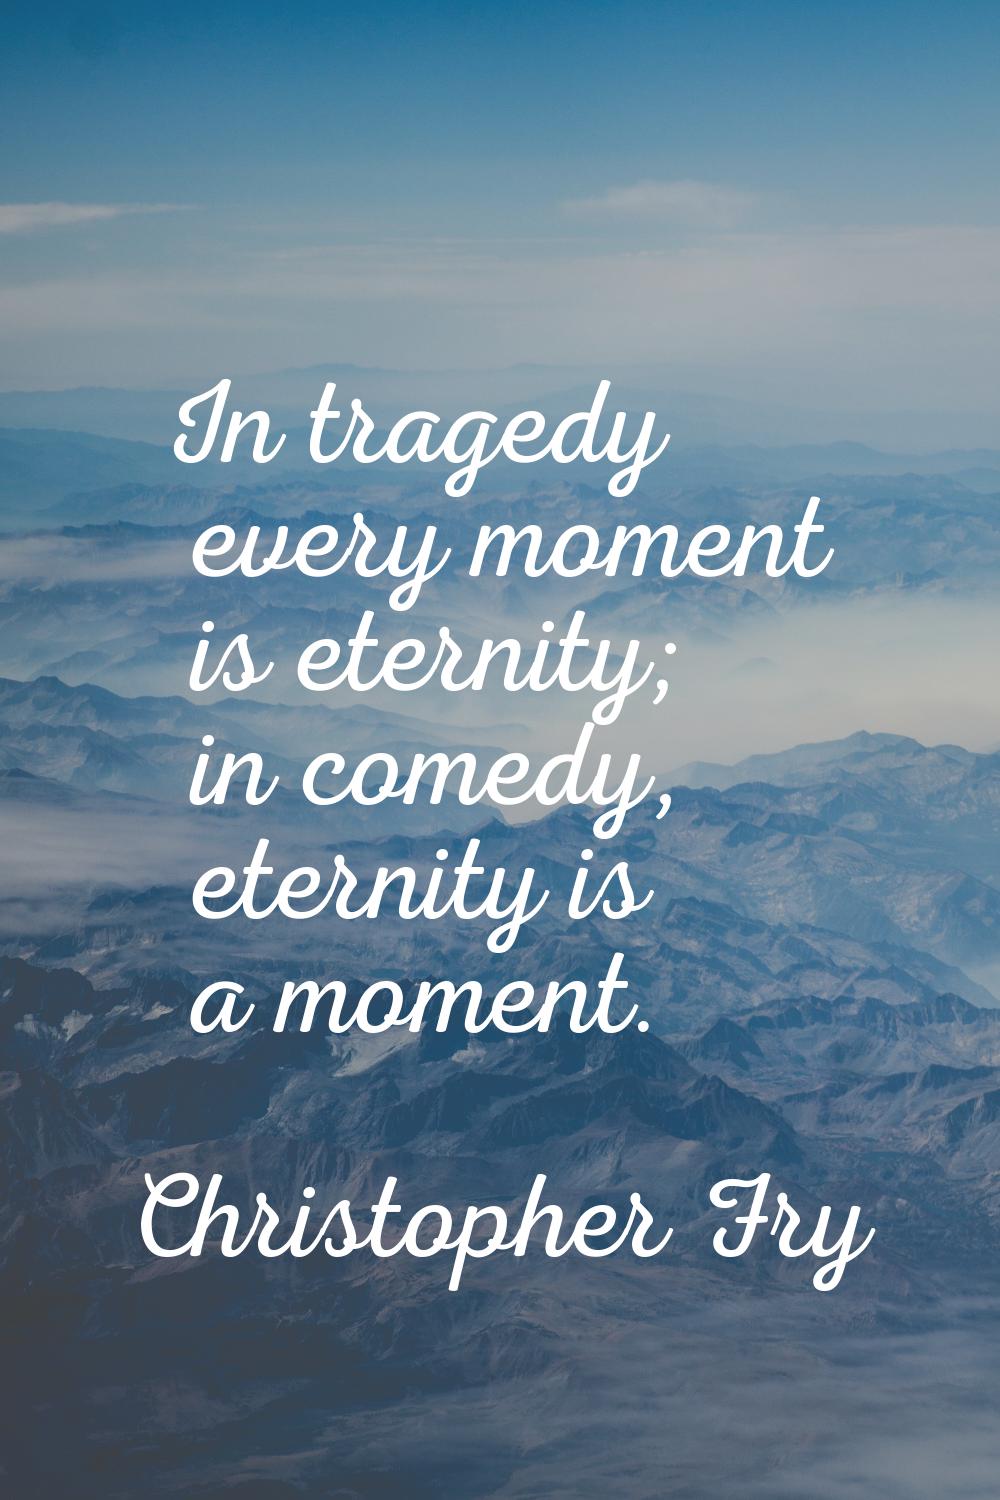 In tragedy every moment is eternity; in comedy, eternity is a moment.